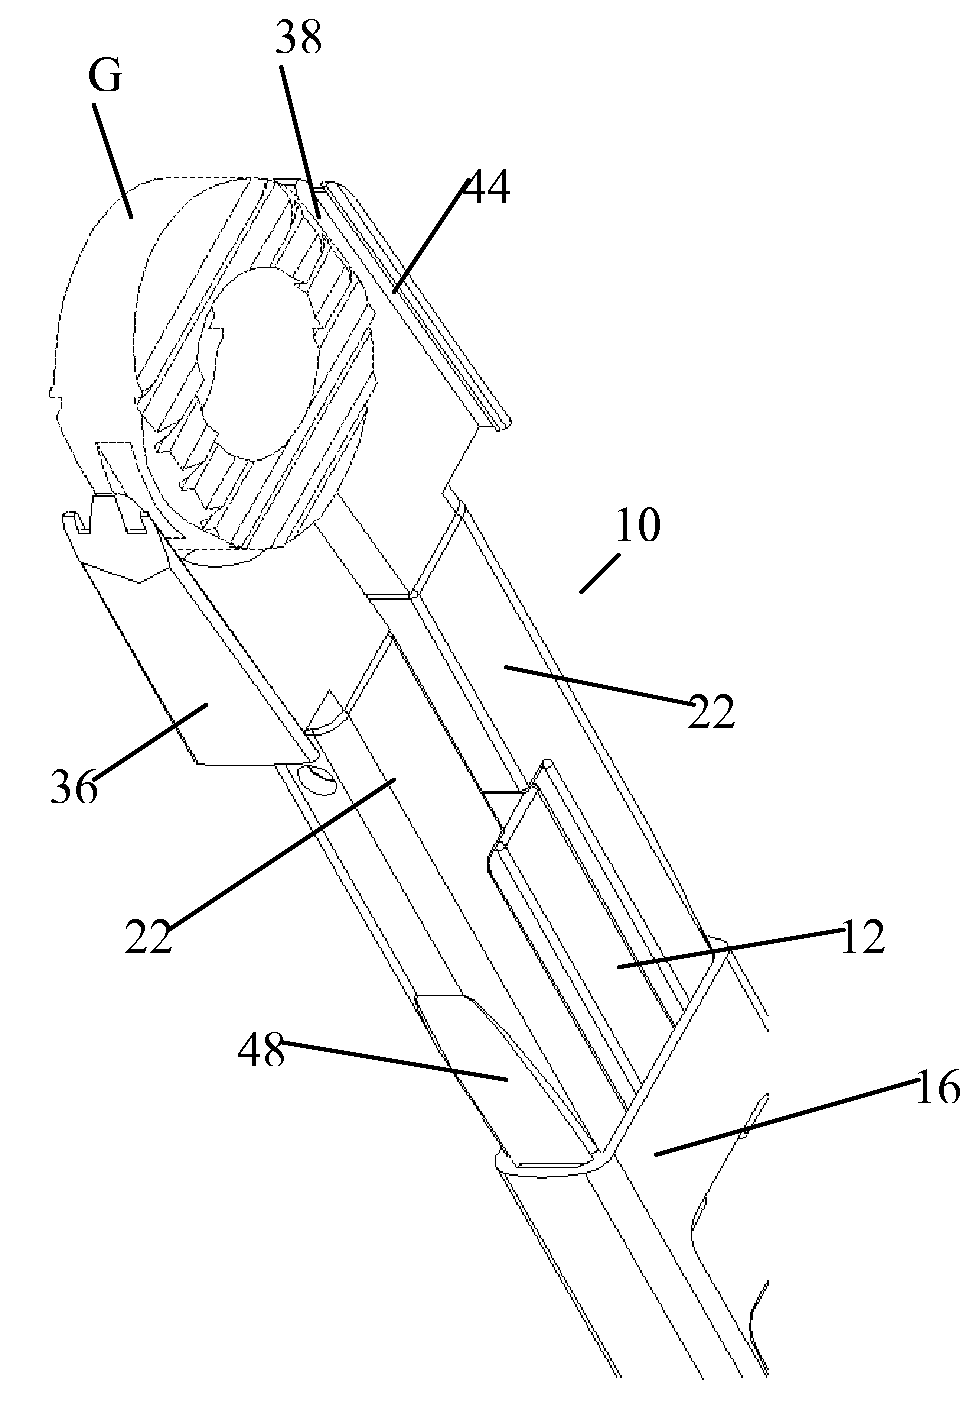 Apparatus and Methods for Inserting an Implant